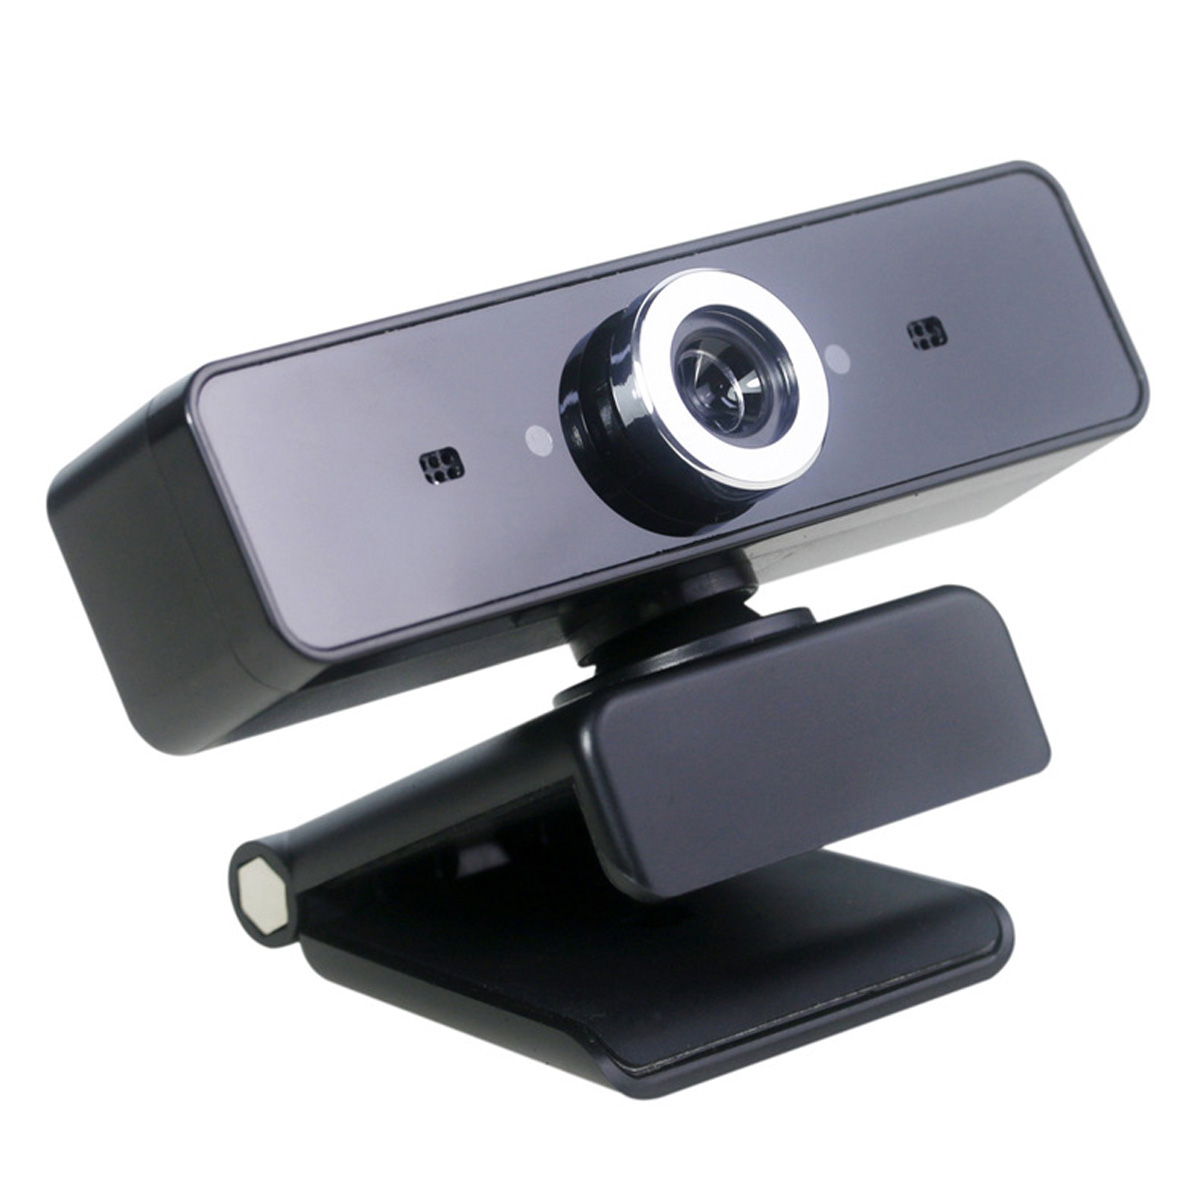 Avanc HD 720P USB Webcam with Microphone for PC Laptop